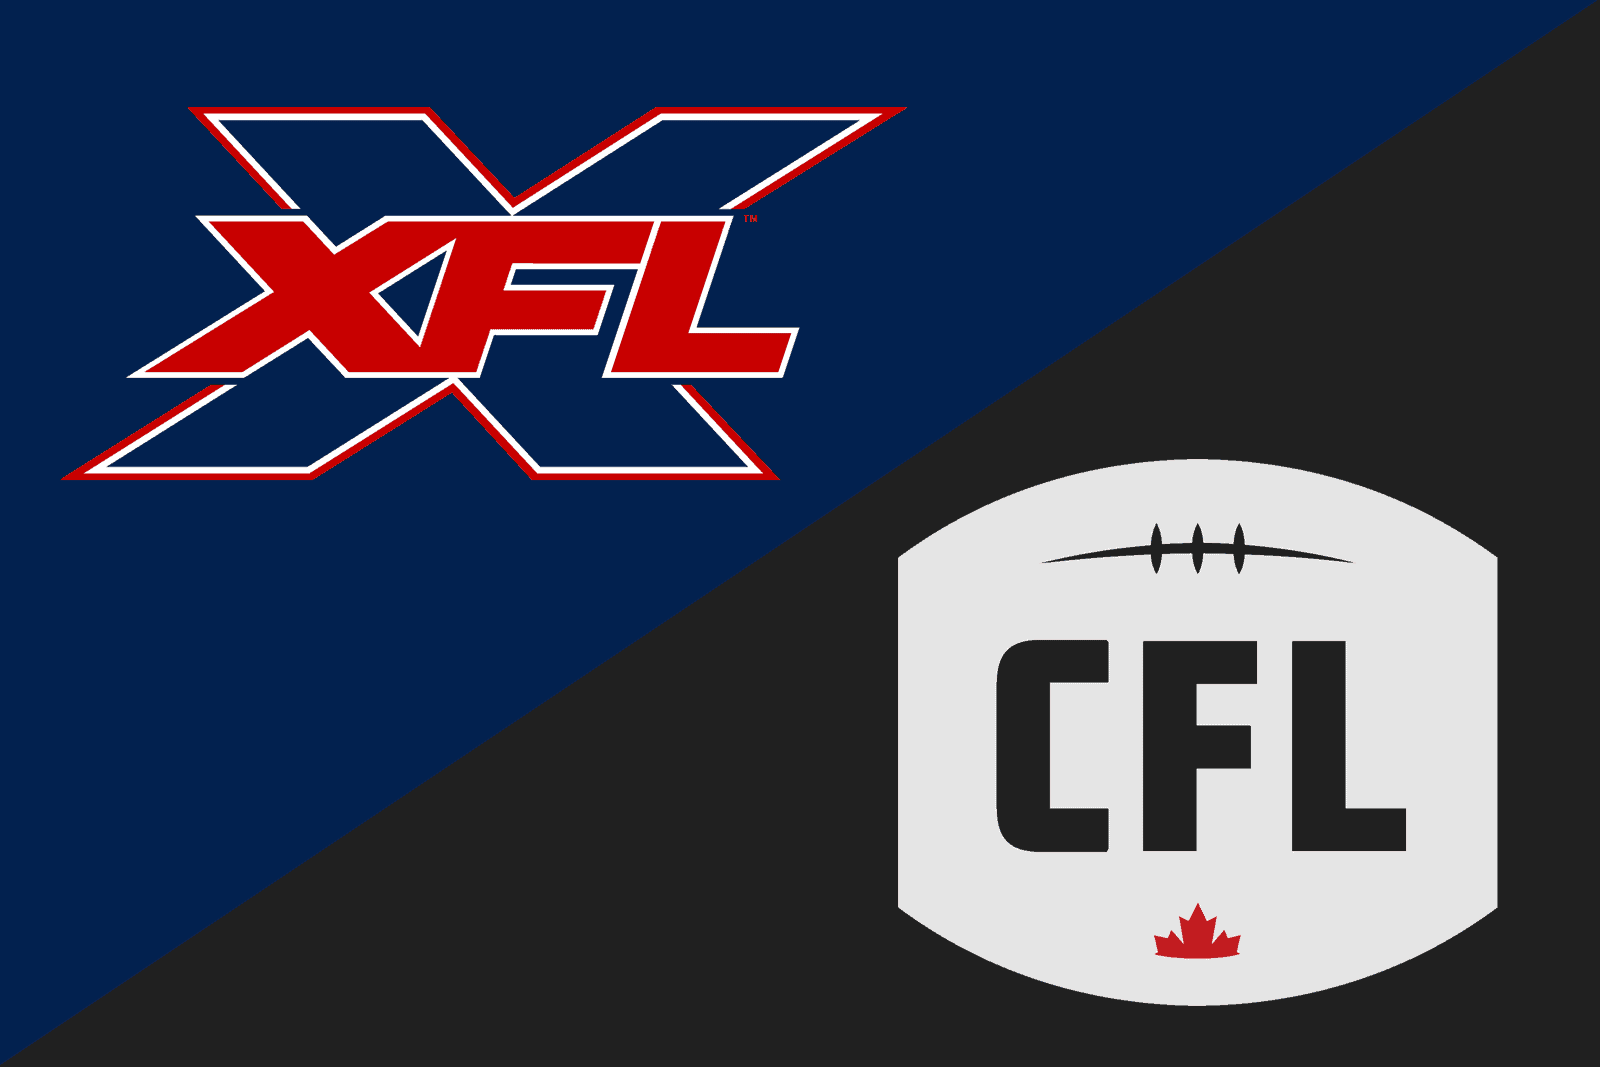  I Have Questions on the CFL/XFL Partnership